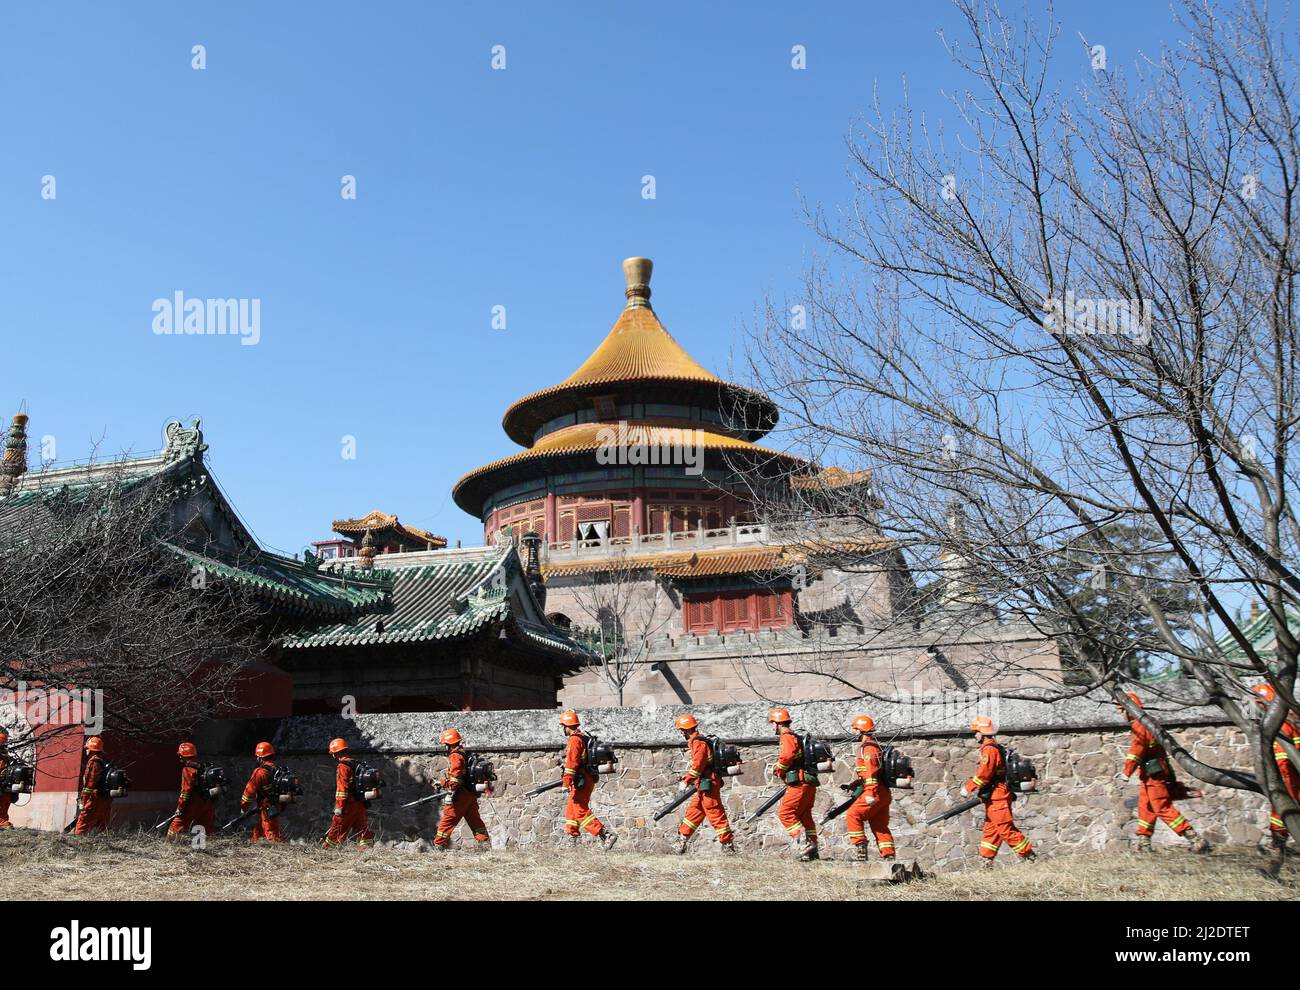 CHENGDE, CHINA - APRIL 1, 2022 - Firefighters inspect a mountain resort and its surrounding temple in Chengde City, North China's Hebei Province, Apri Stock Photo